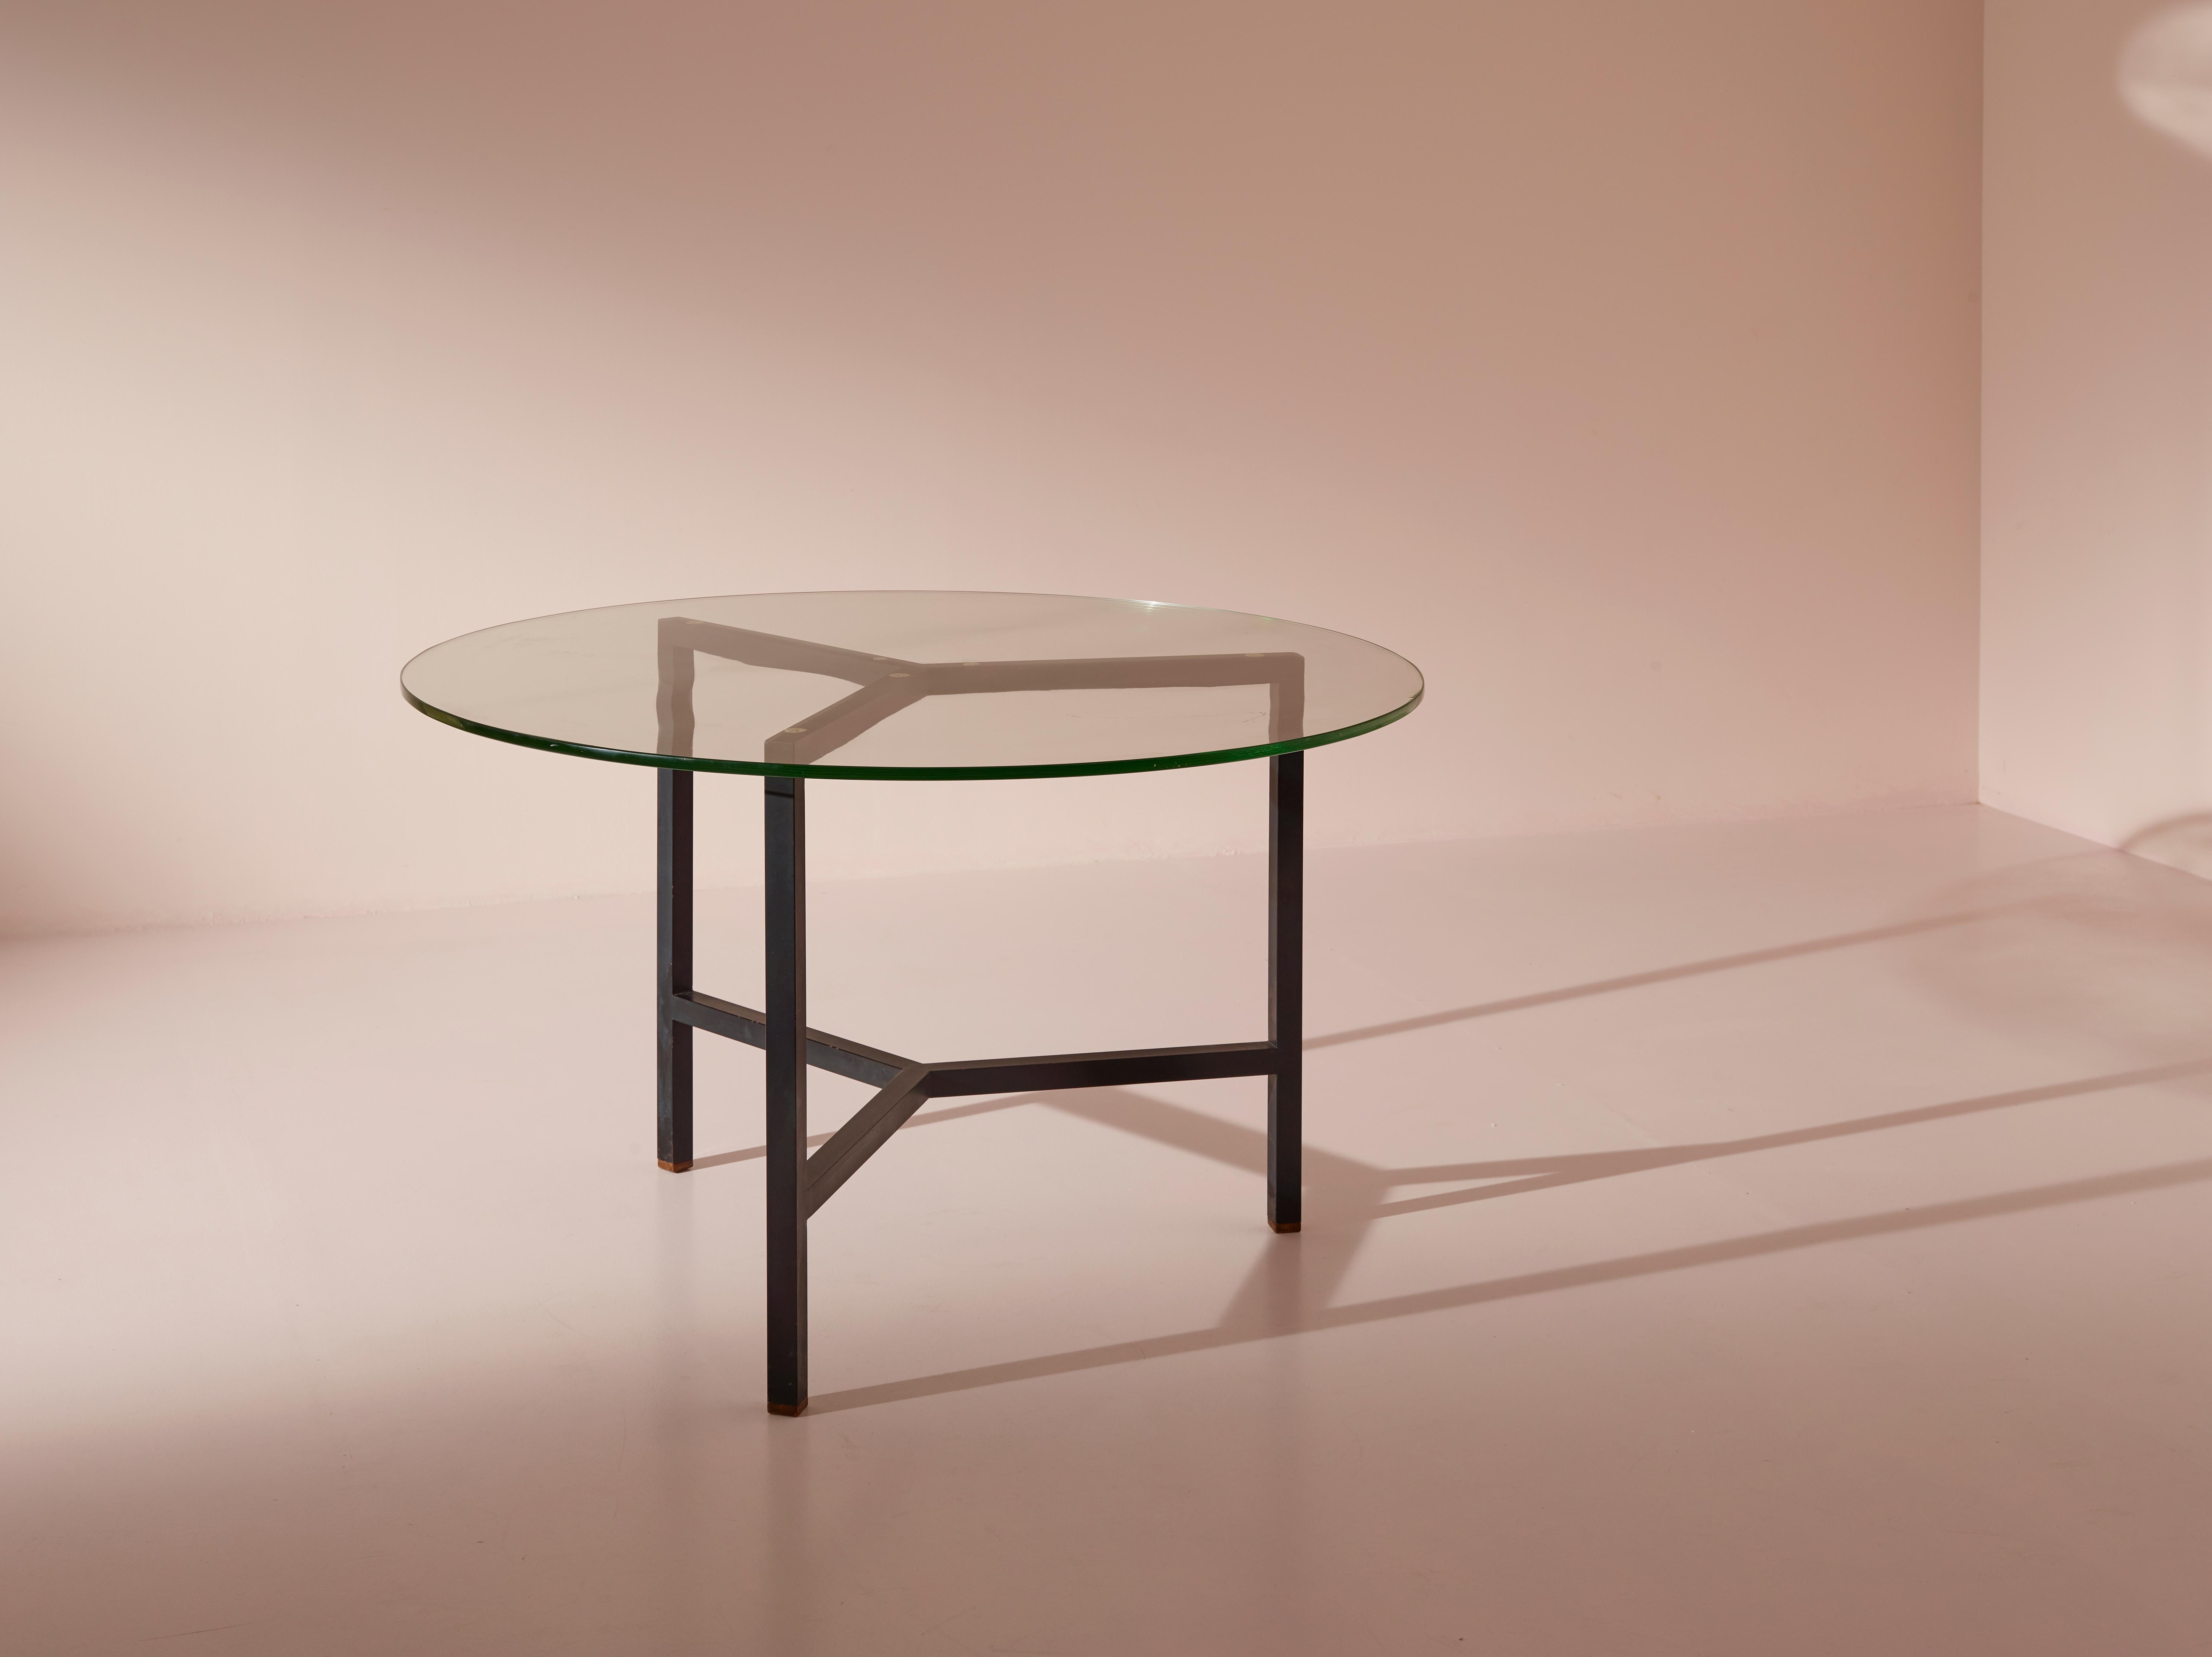 Mid-20th Century A metal and glass round dining table, Italy, 1950s For Sale